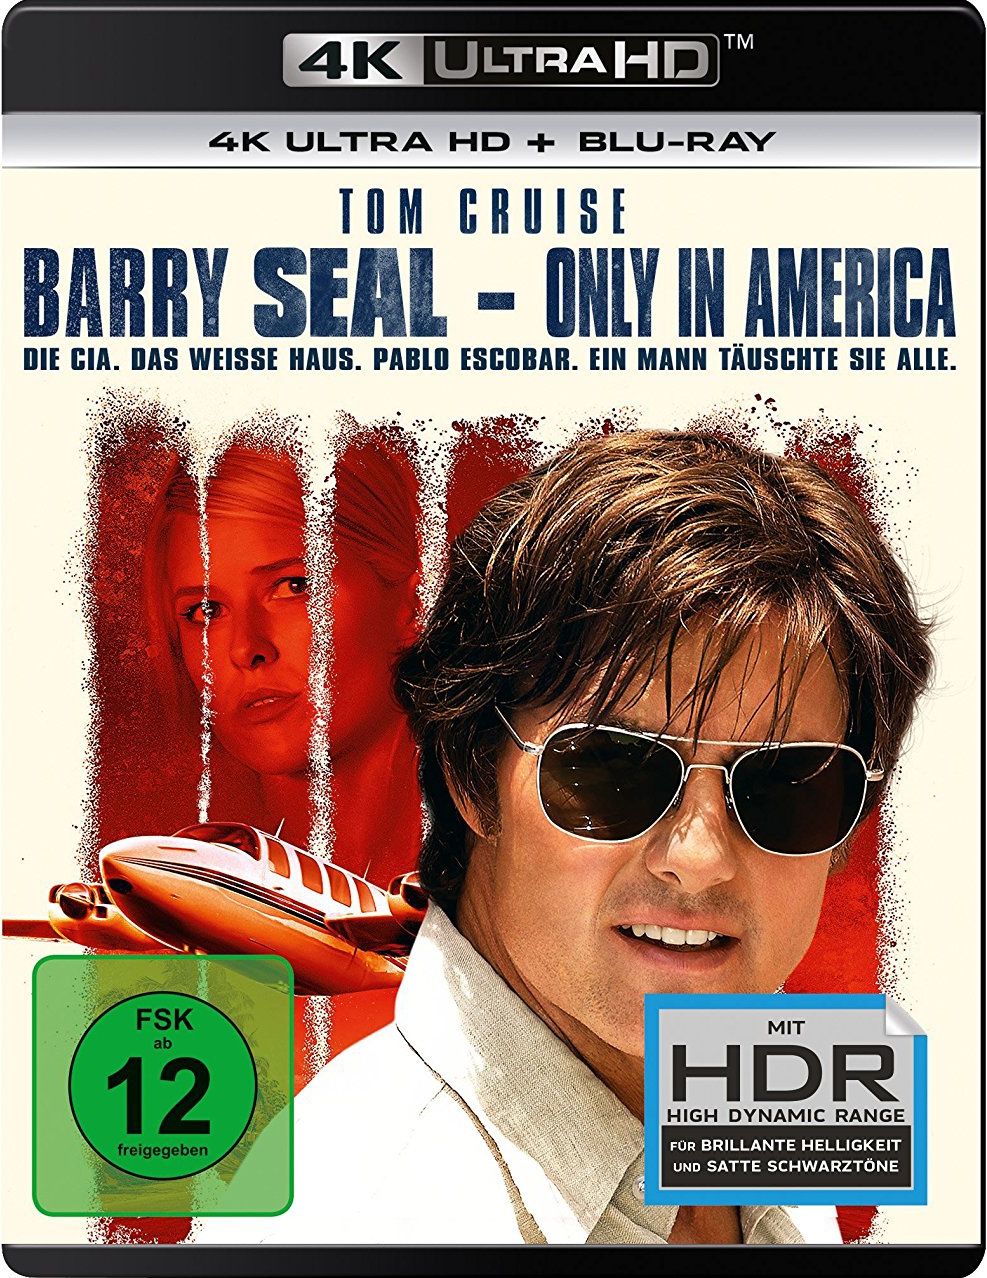 Barry Seal - Only in America (2 Discs) (UHD BLURAY + BLURAY)